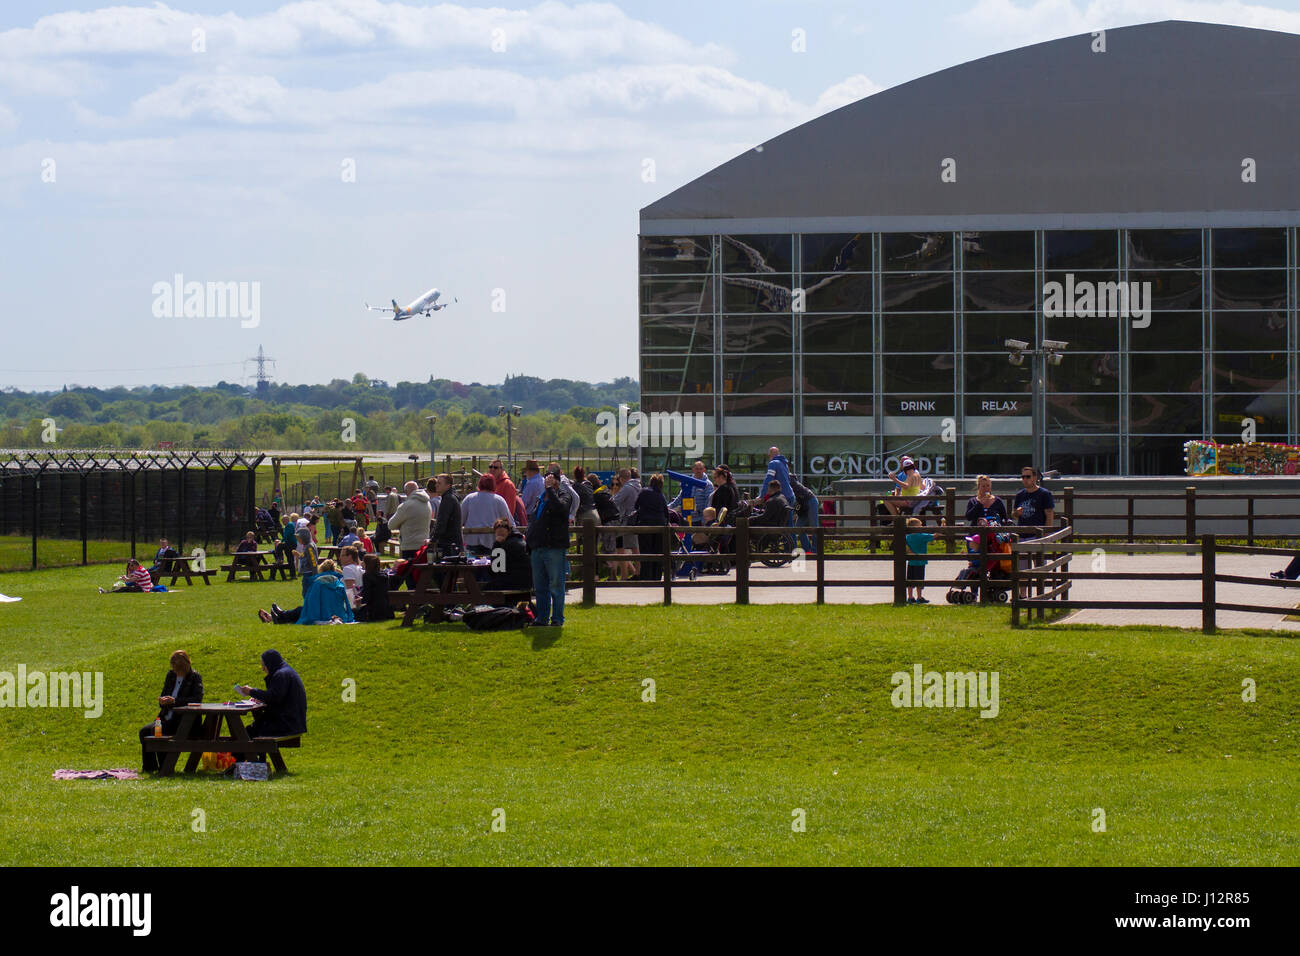 Planespotters Flugzeuge am Manchester Airport Aviation Viewing Park ansehen Stockfoto